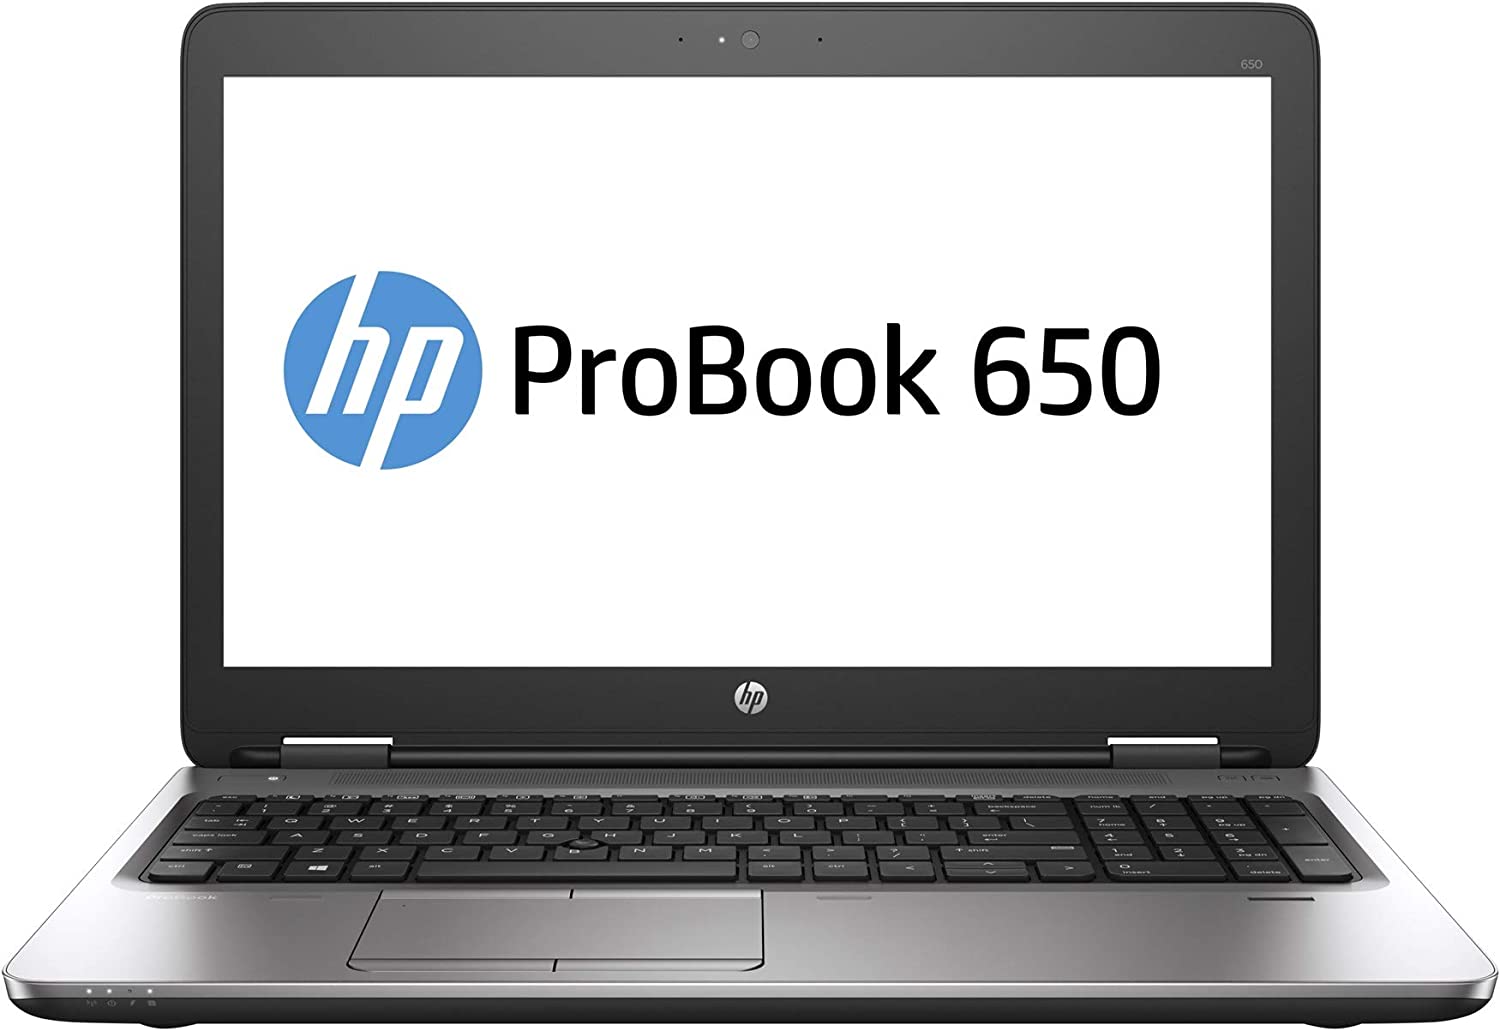 HP ProBook 650 G2 Core i5-6300hq 2.4 GHz 15.6 inches FHD display windows 10 Pro(Renewed)